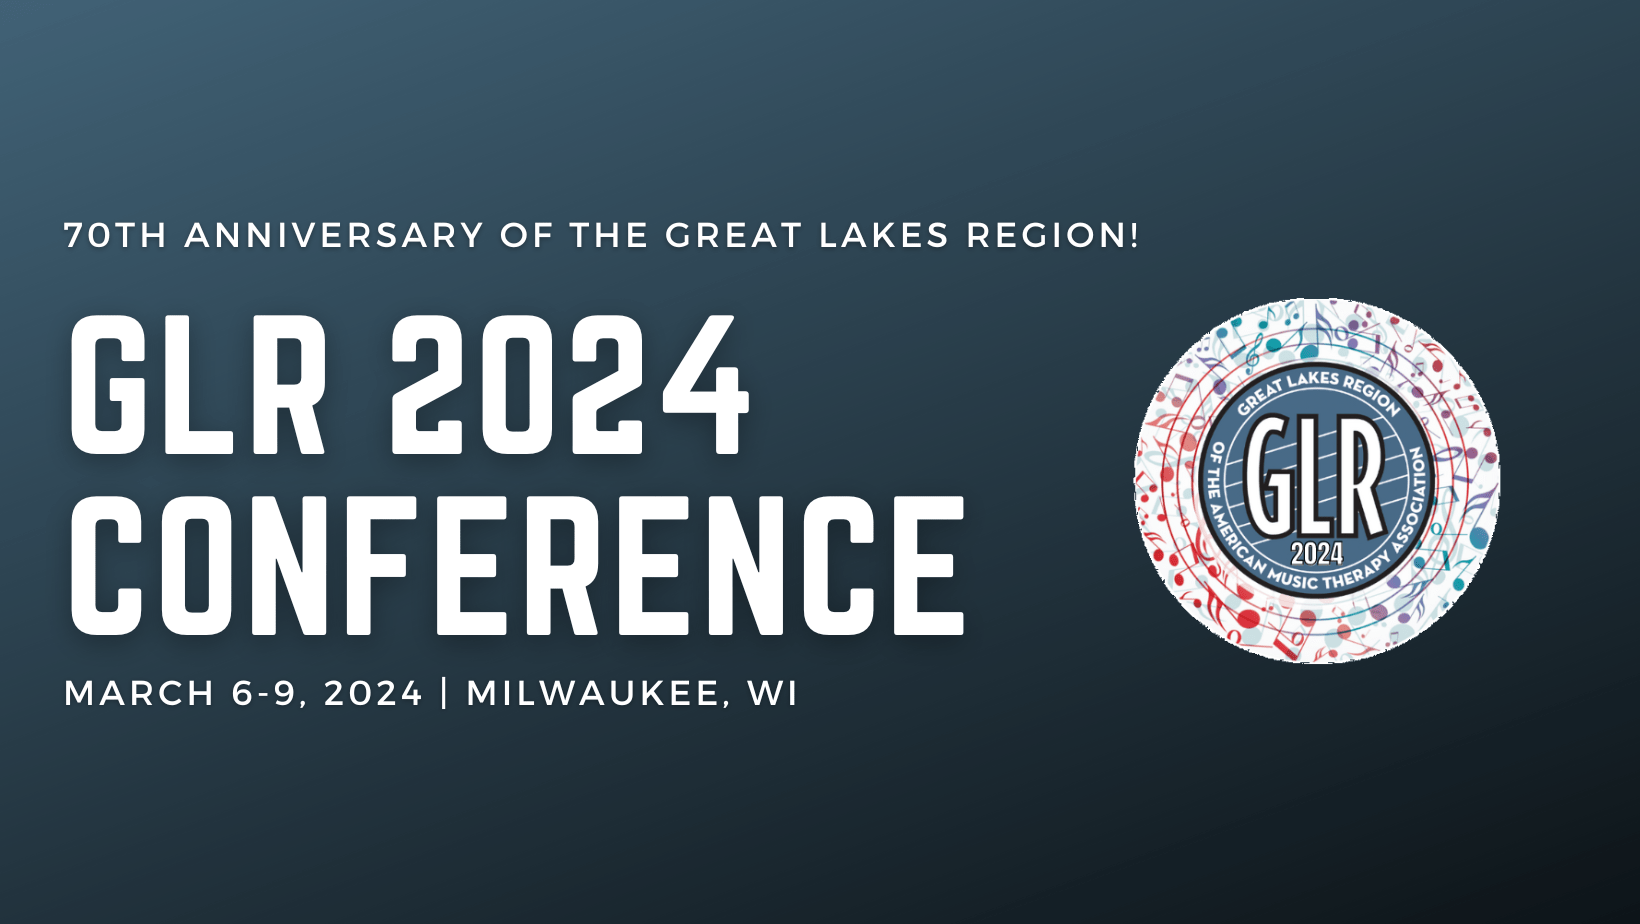 Dark blue background with white text on the left side and GLR 2024 Conference logo on the right side. Text states "70th Anniversary of the Great Lakes Region! GLR 2024 Conference. March 6-9, 2024. Milwaukee, WI"